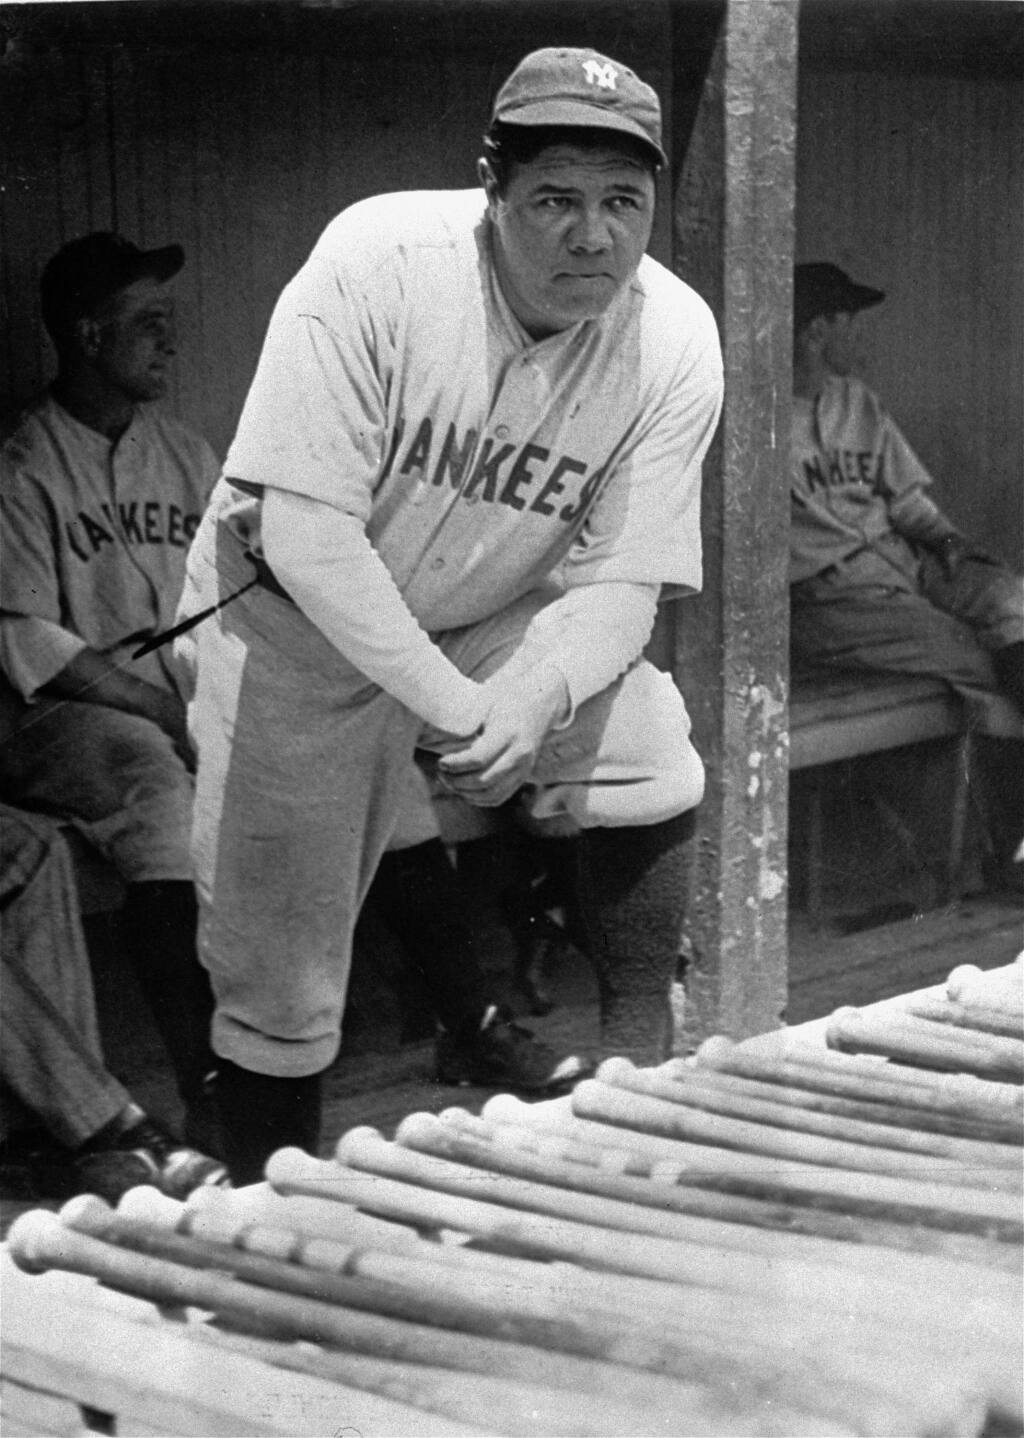 Babe Ruth: Bat used for 500th homer hits auction block